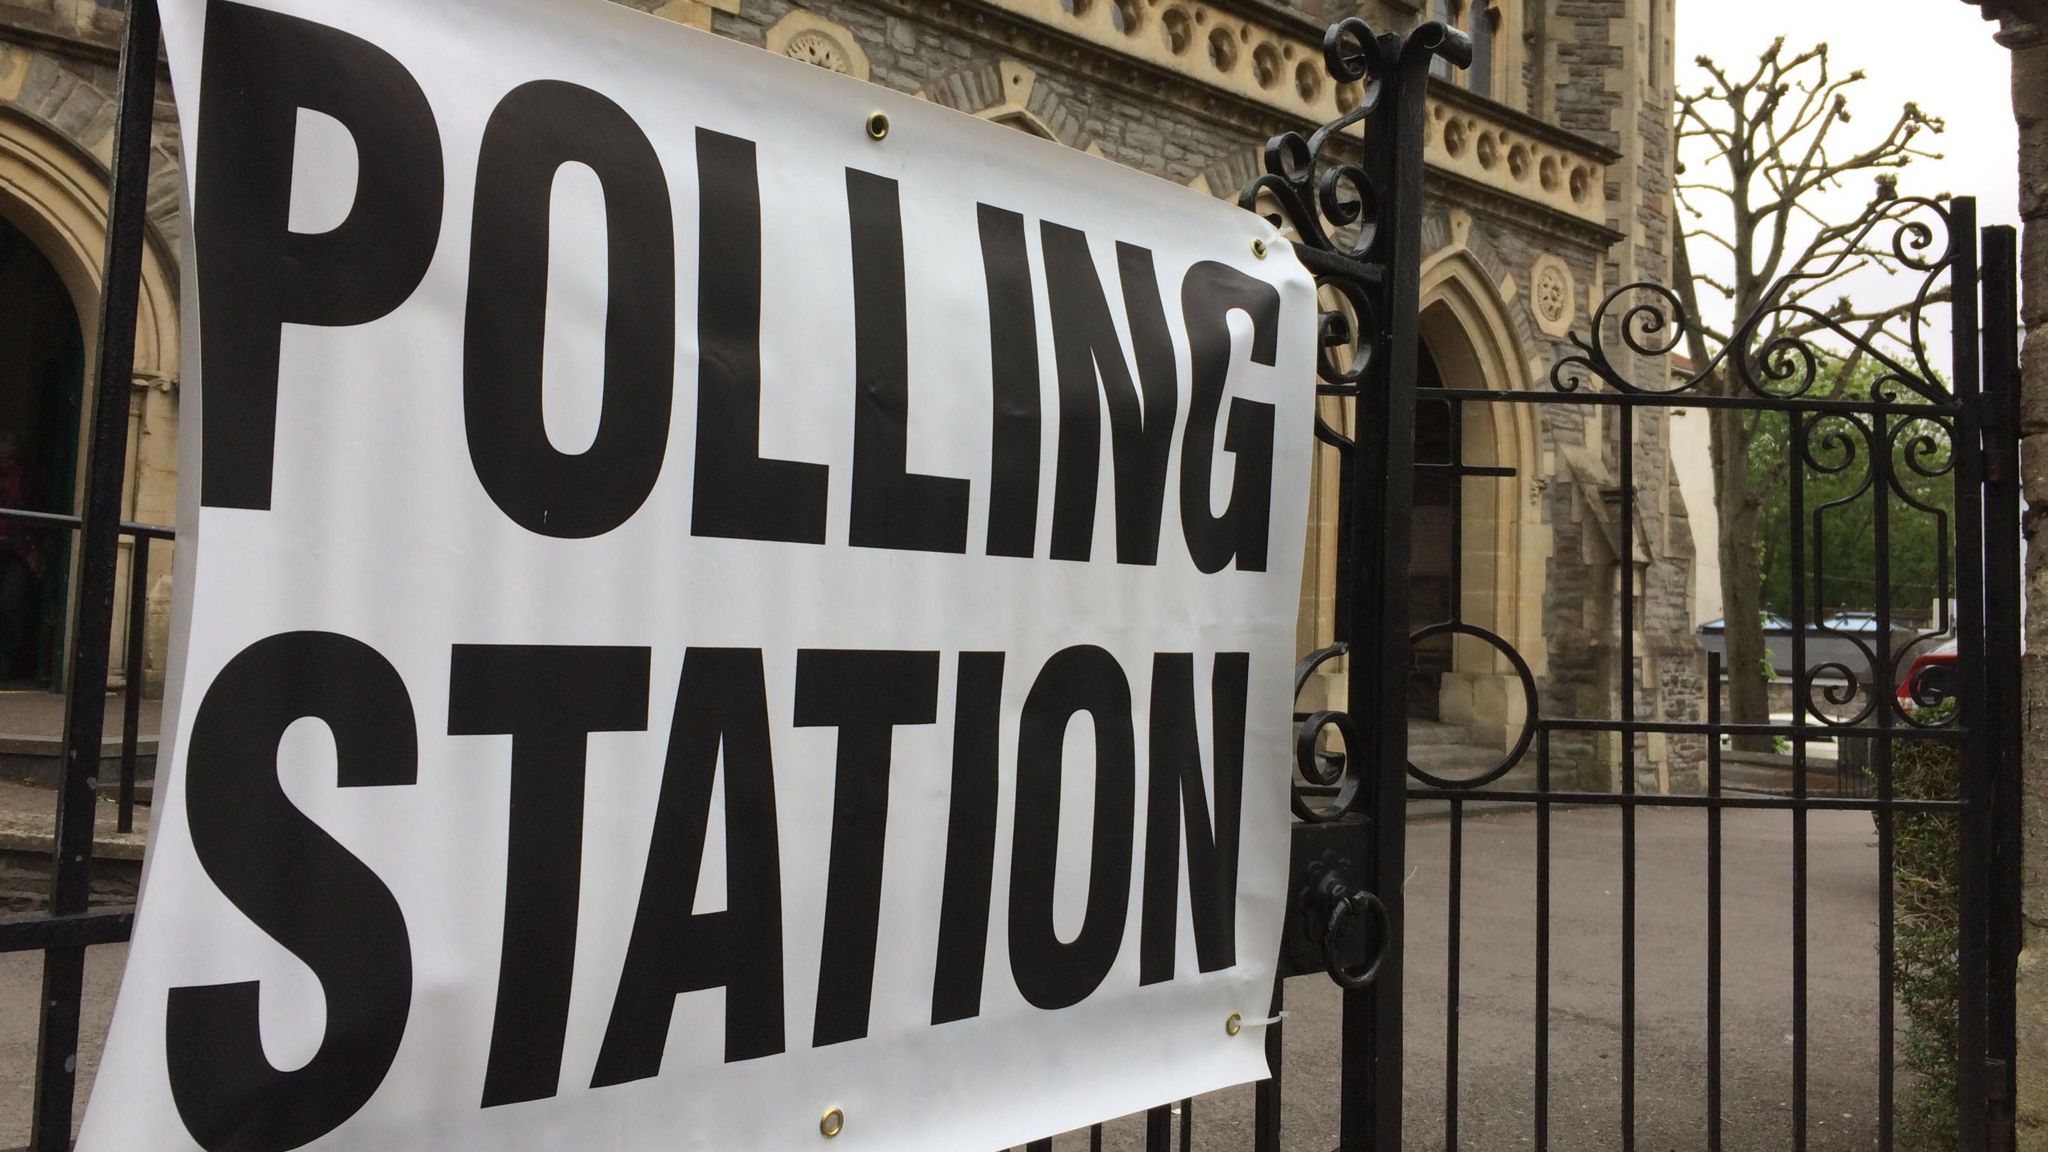 Polling station sign on a fence